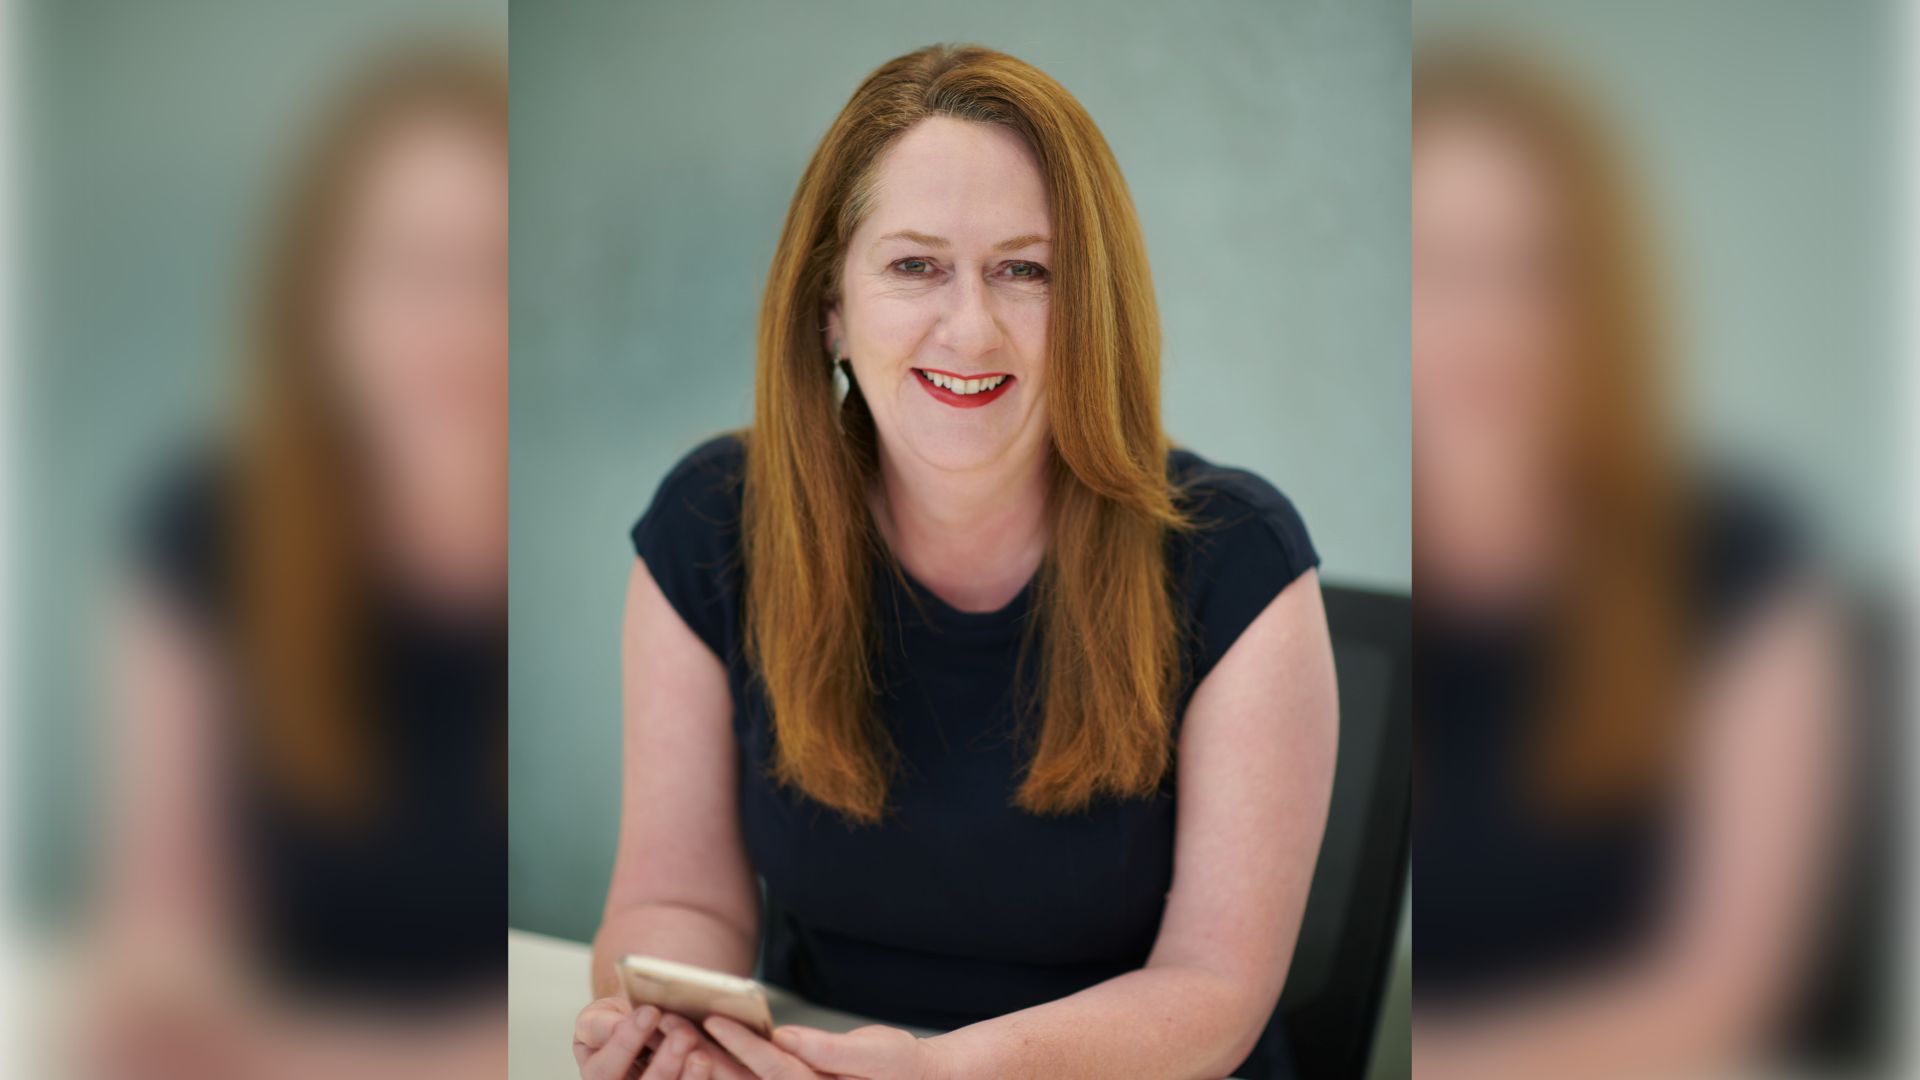 Swinburne alum and Associate Professor in Accounting at Swinburne, Dr Gráinne Oates is sitting at a desk smiling directly at the camera